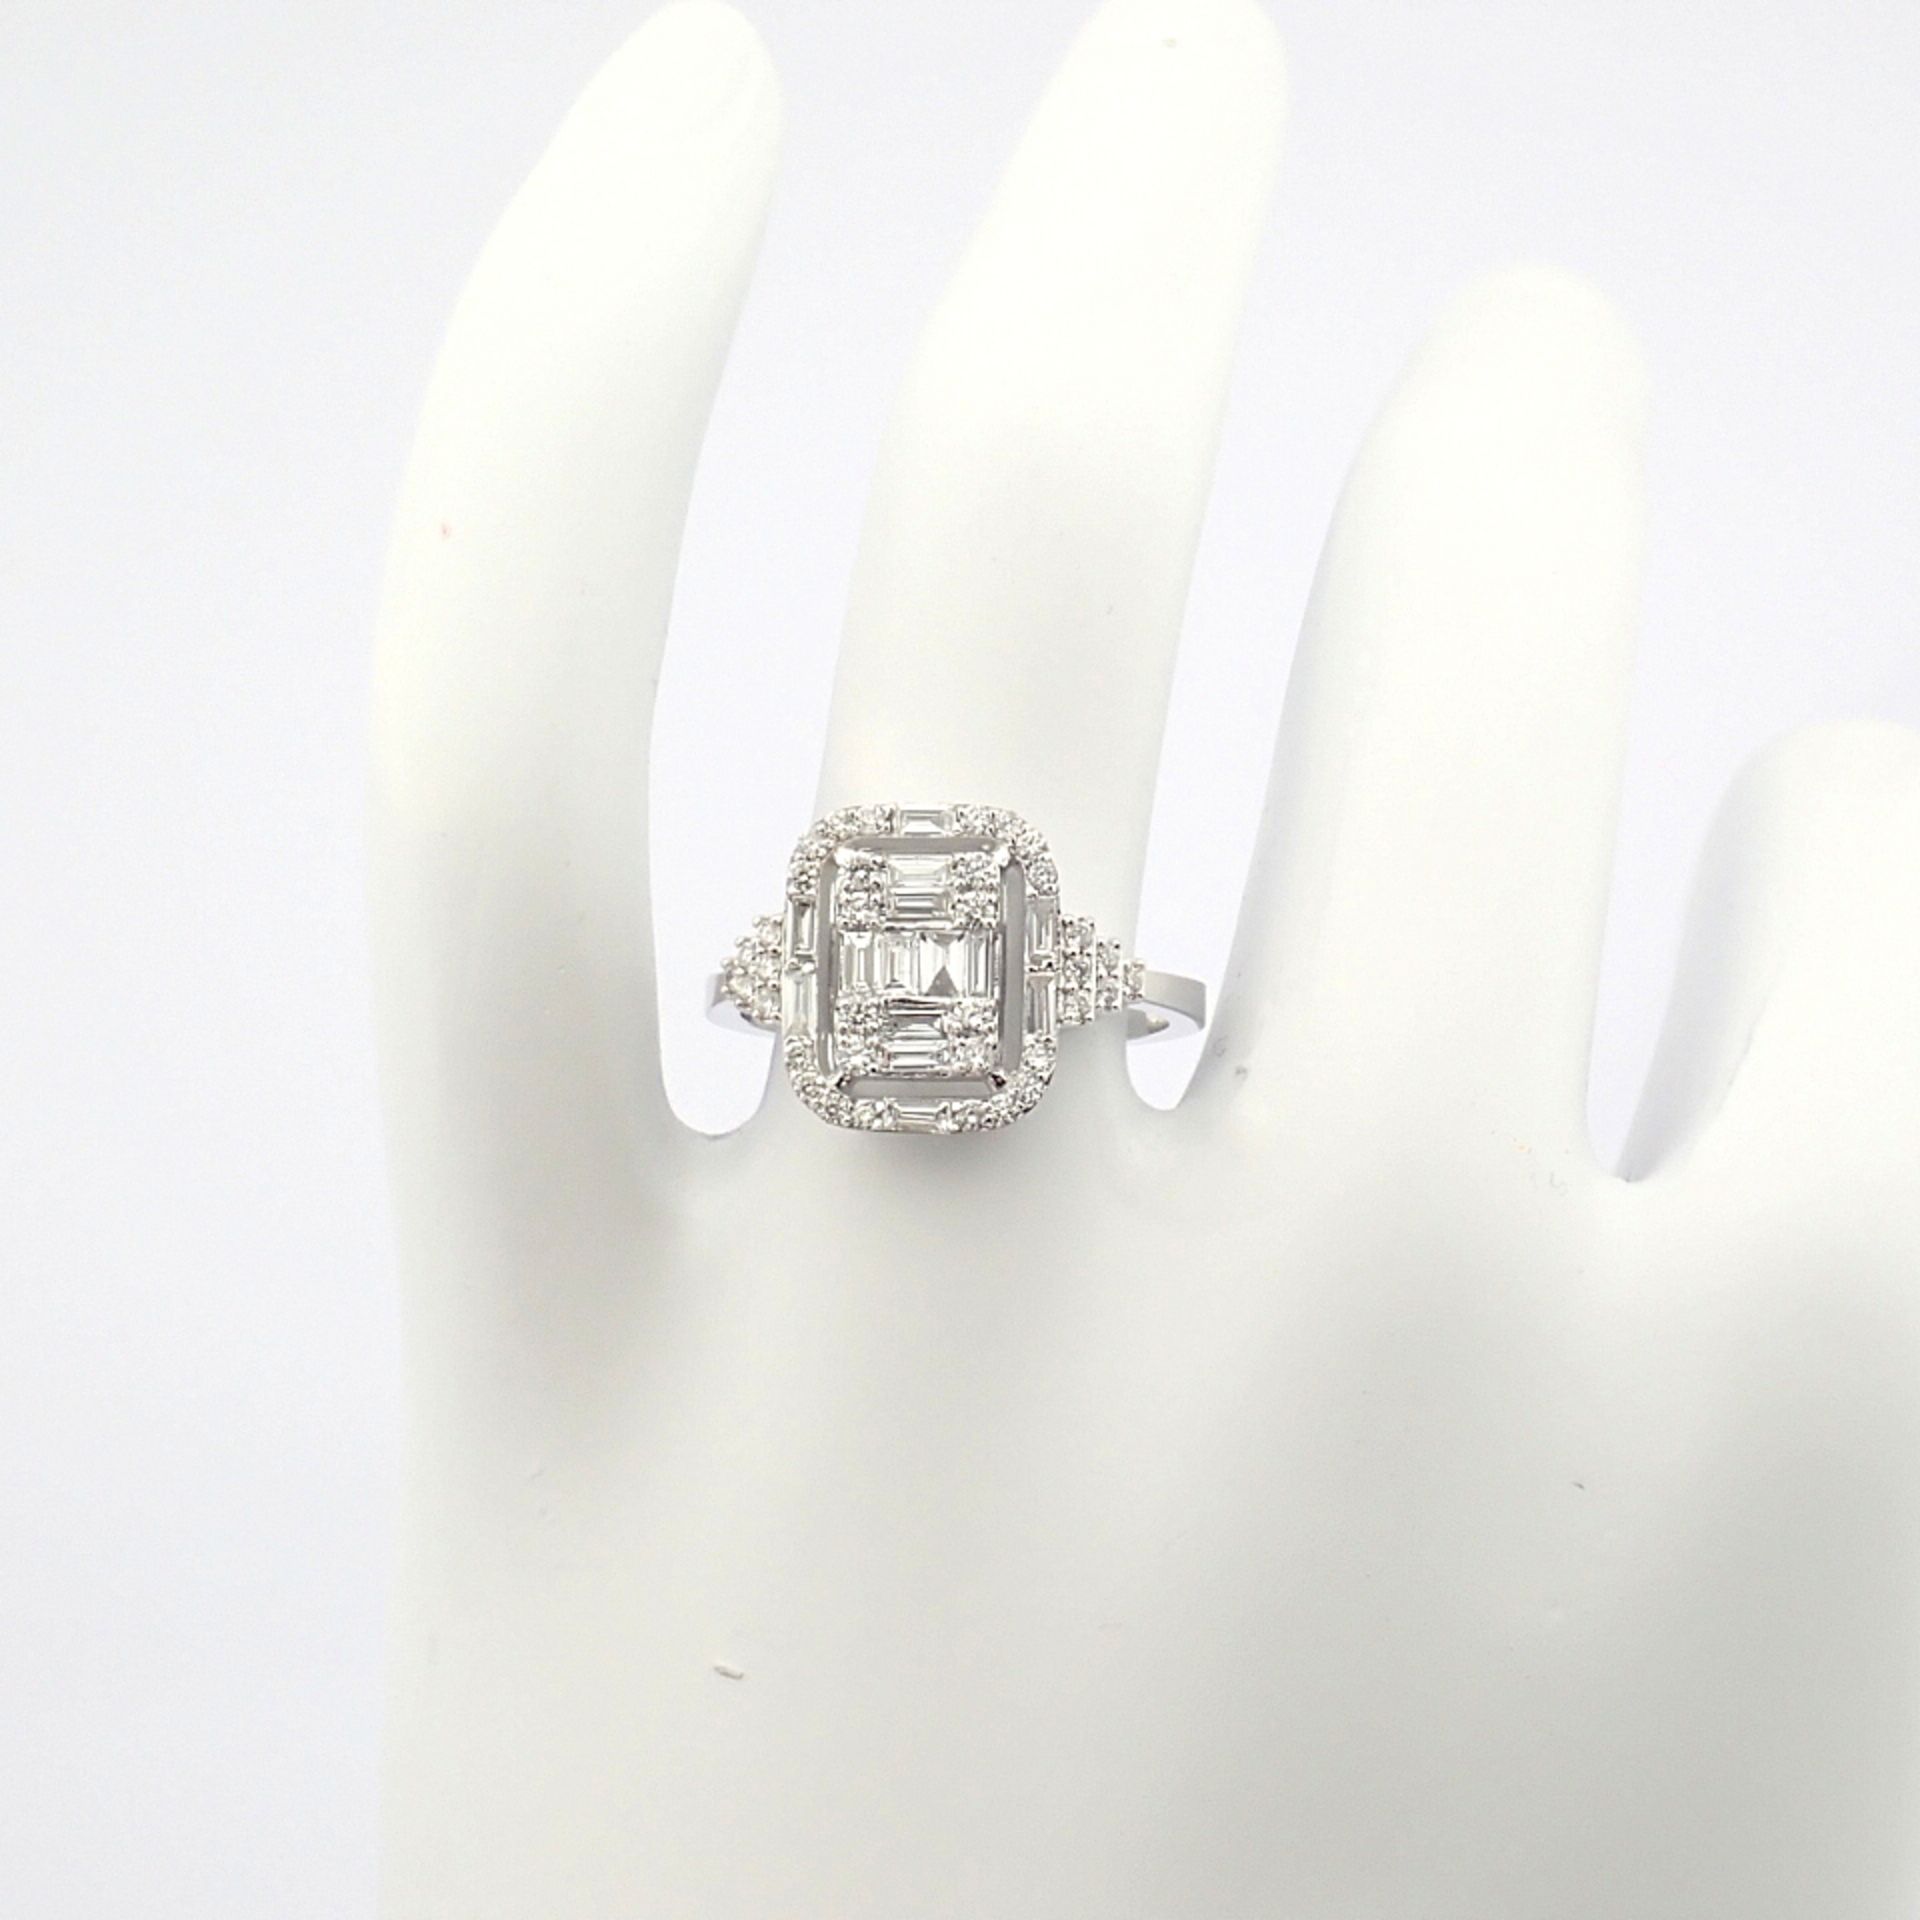 Certificated 14K White Gold Diamond Ring (Total 0.64 ct Stone) - Image 13 of 14